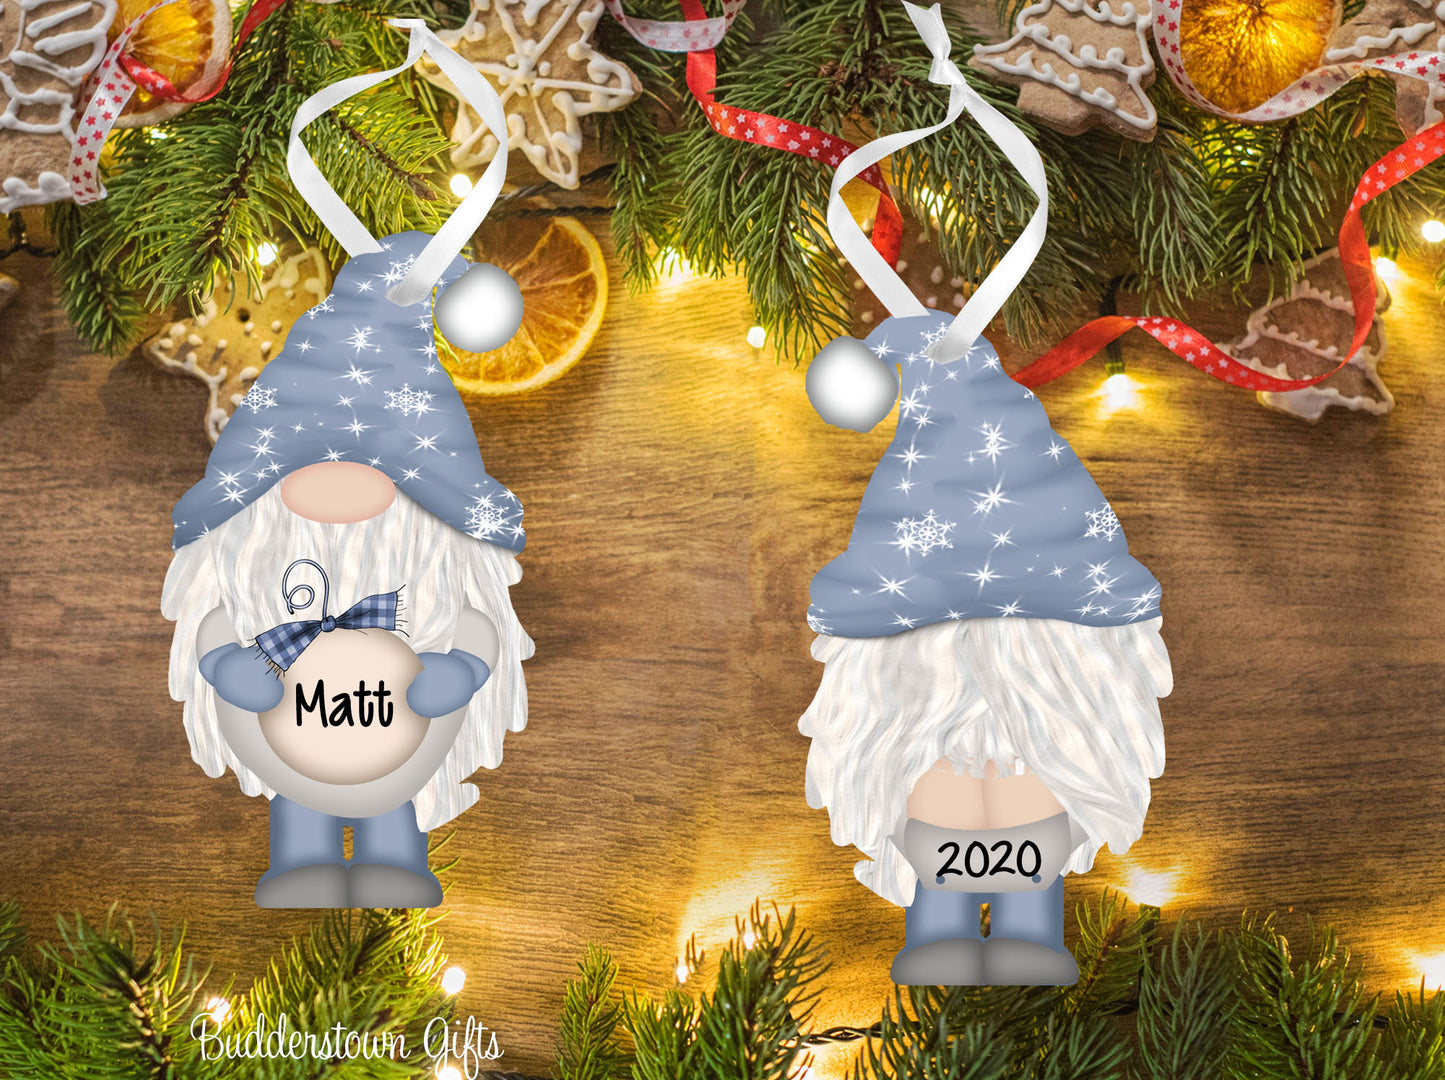 Holiday / Christmas GNOME Ornaments - Personalized ornament - 4 Colors to choose from